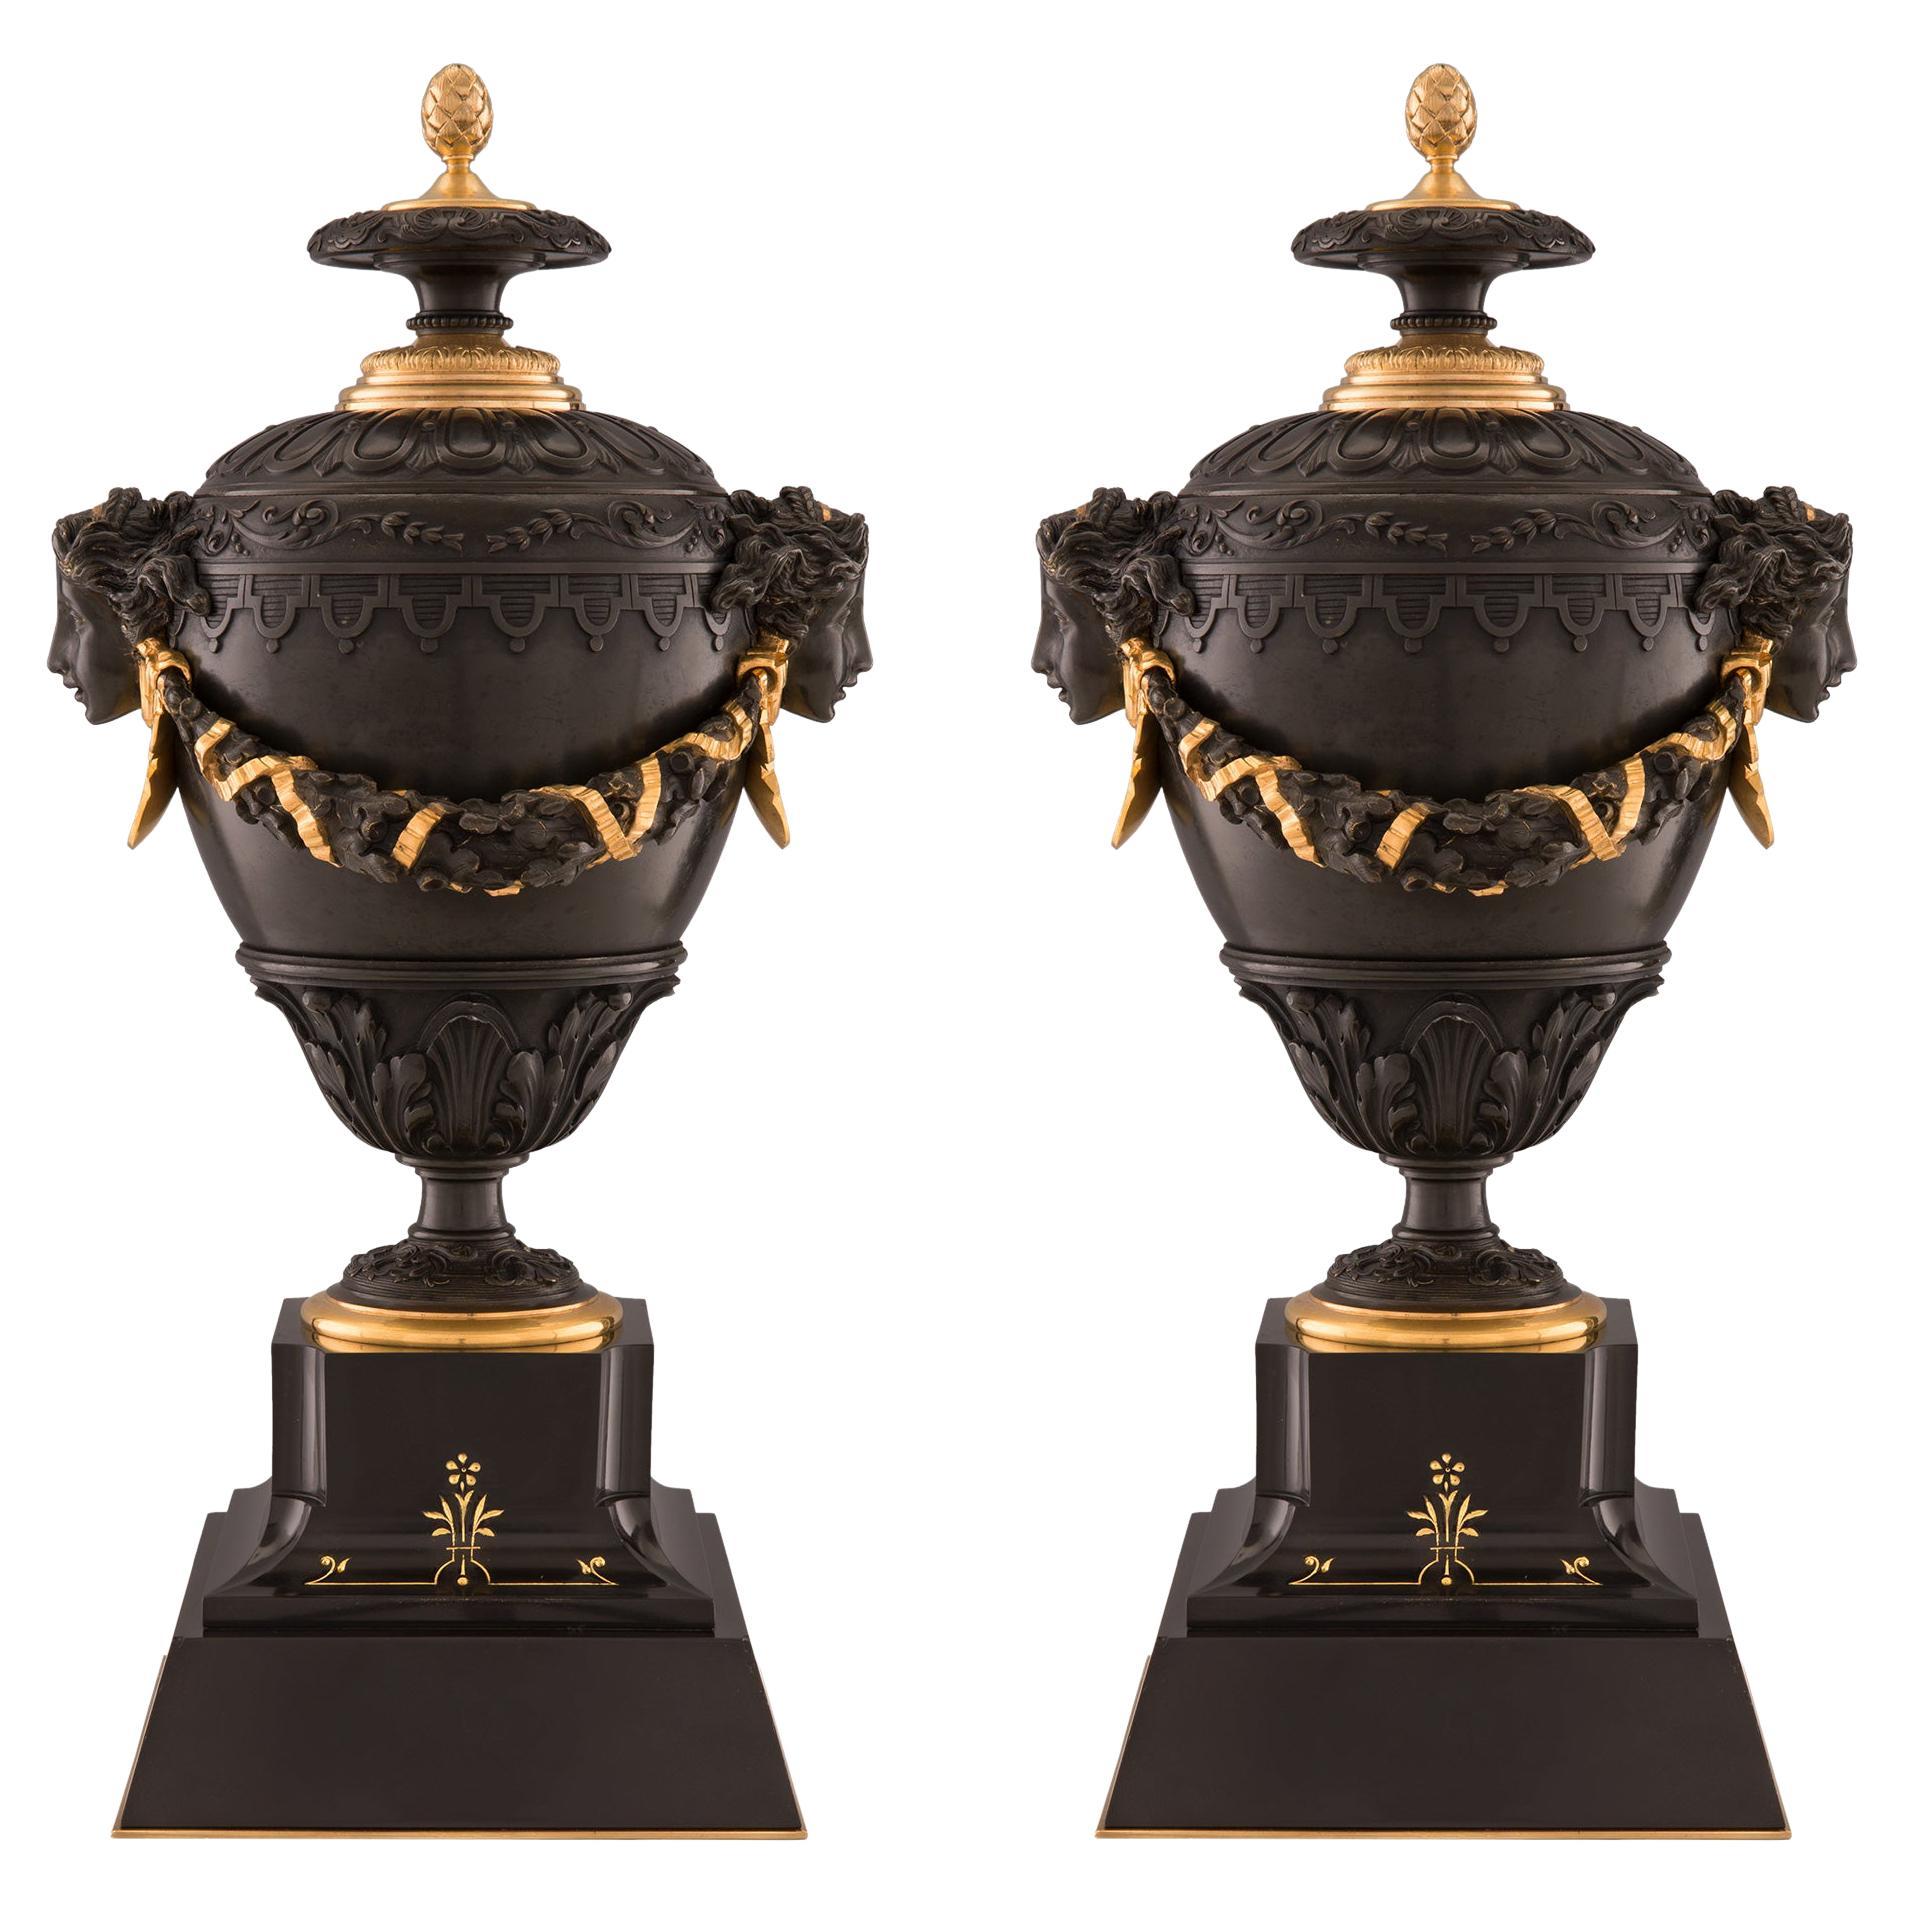 Pair of French 19th Century Charles X Style Marble, Bronze and Ormolu Urns